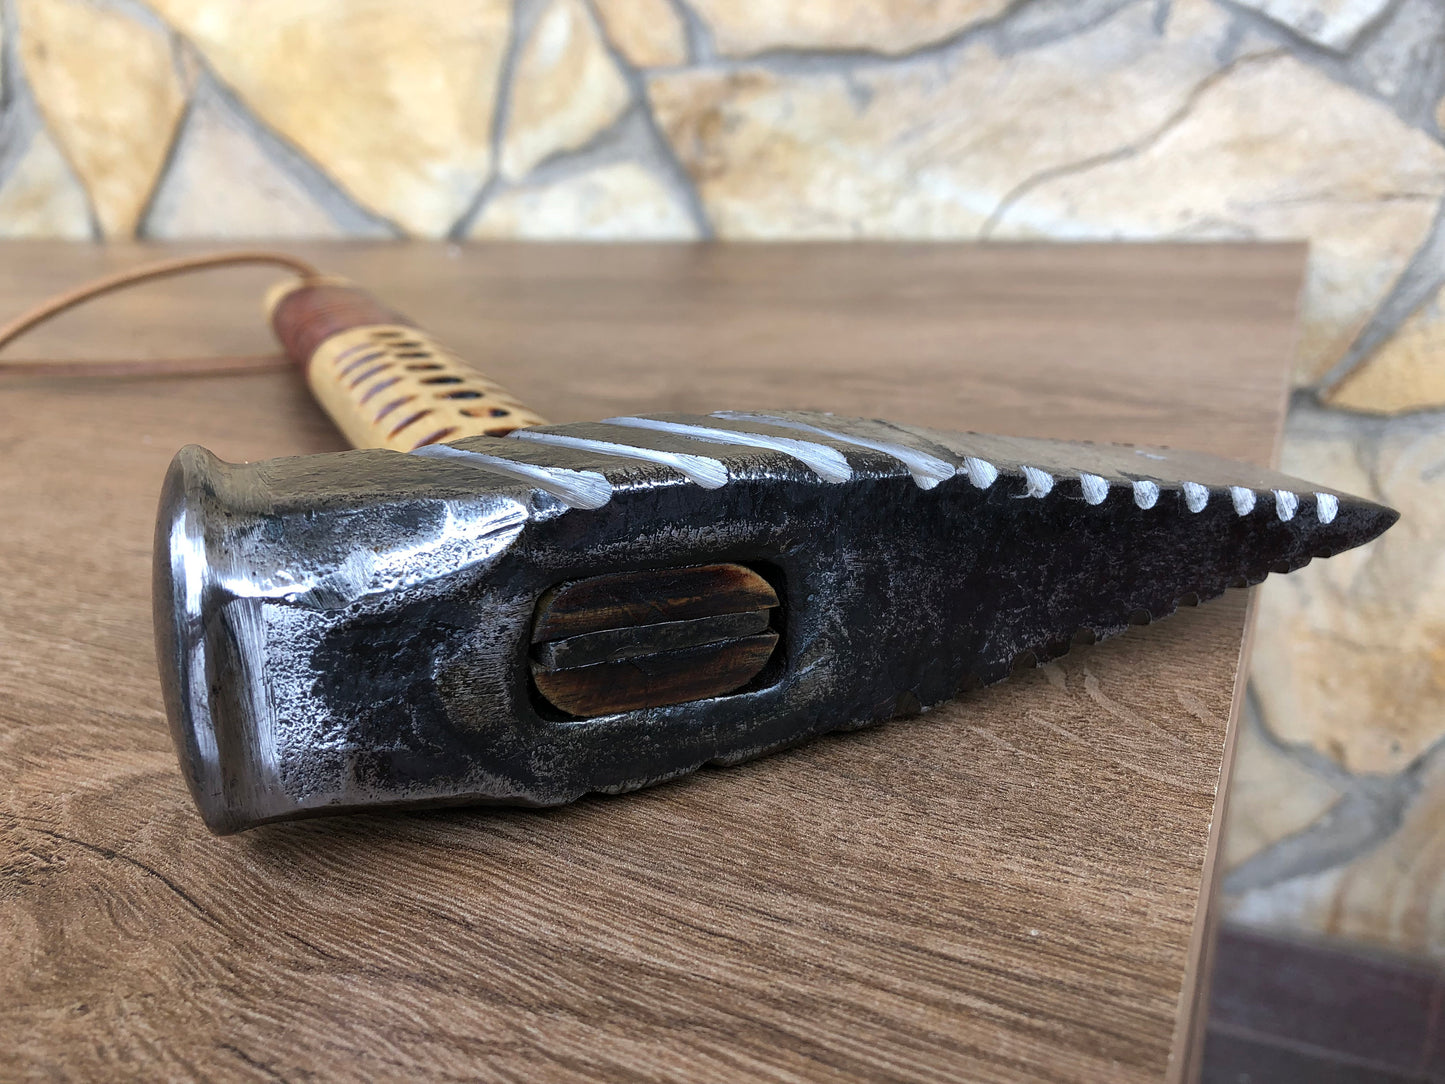 Hammer, blacksmith hammer, hand crafted hammer, fathers day gift, gift for Dad, handyman tool, handyman gift, iron anniversary gift, tools